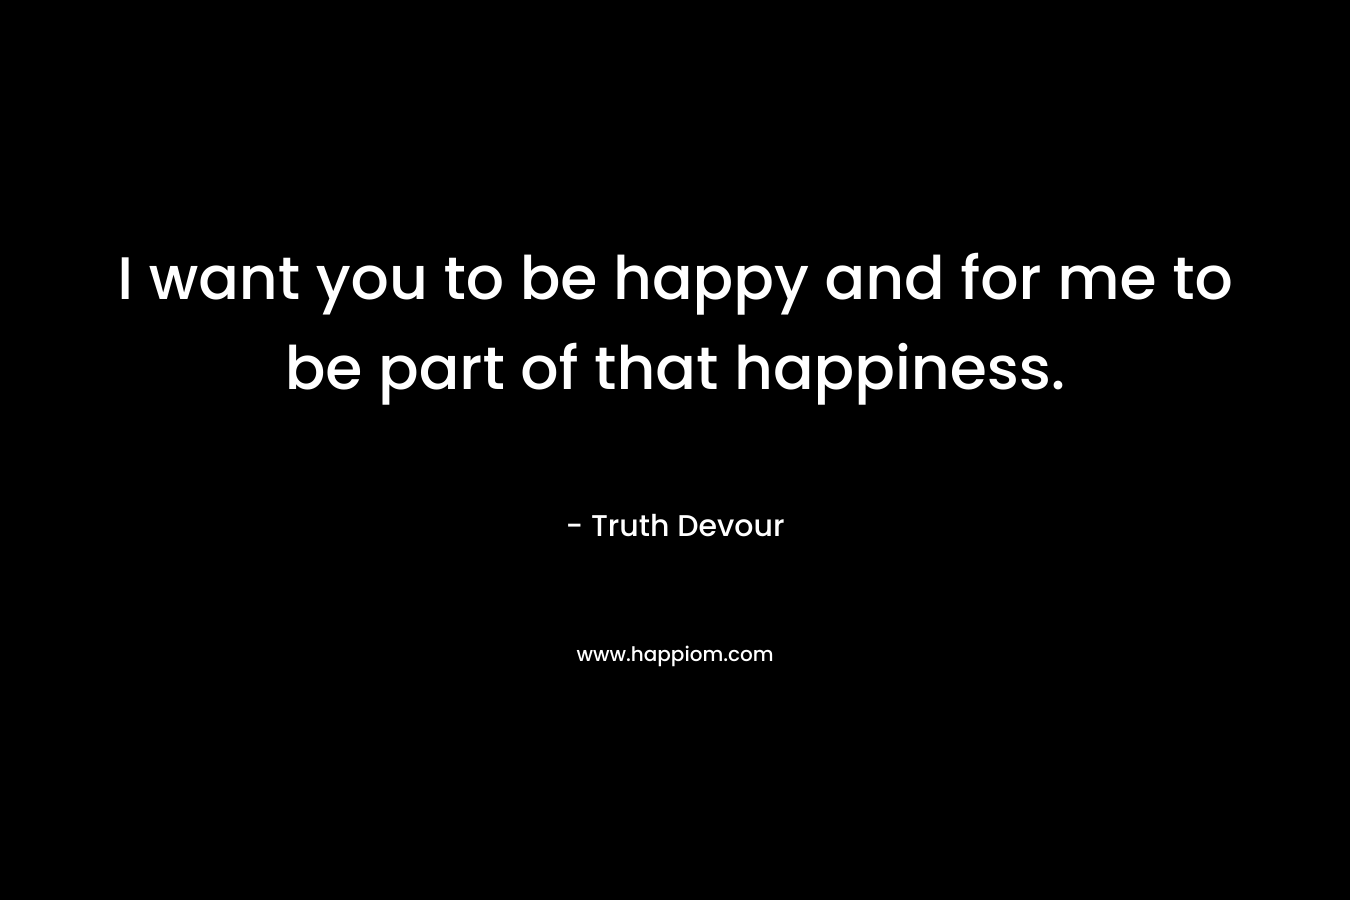 I want you to be happy and for me to be part of that happiness.